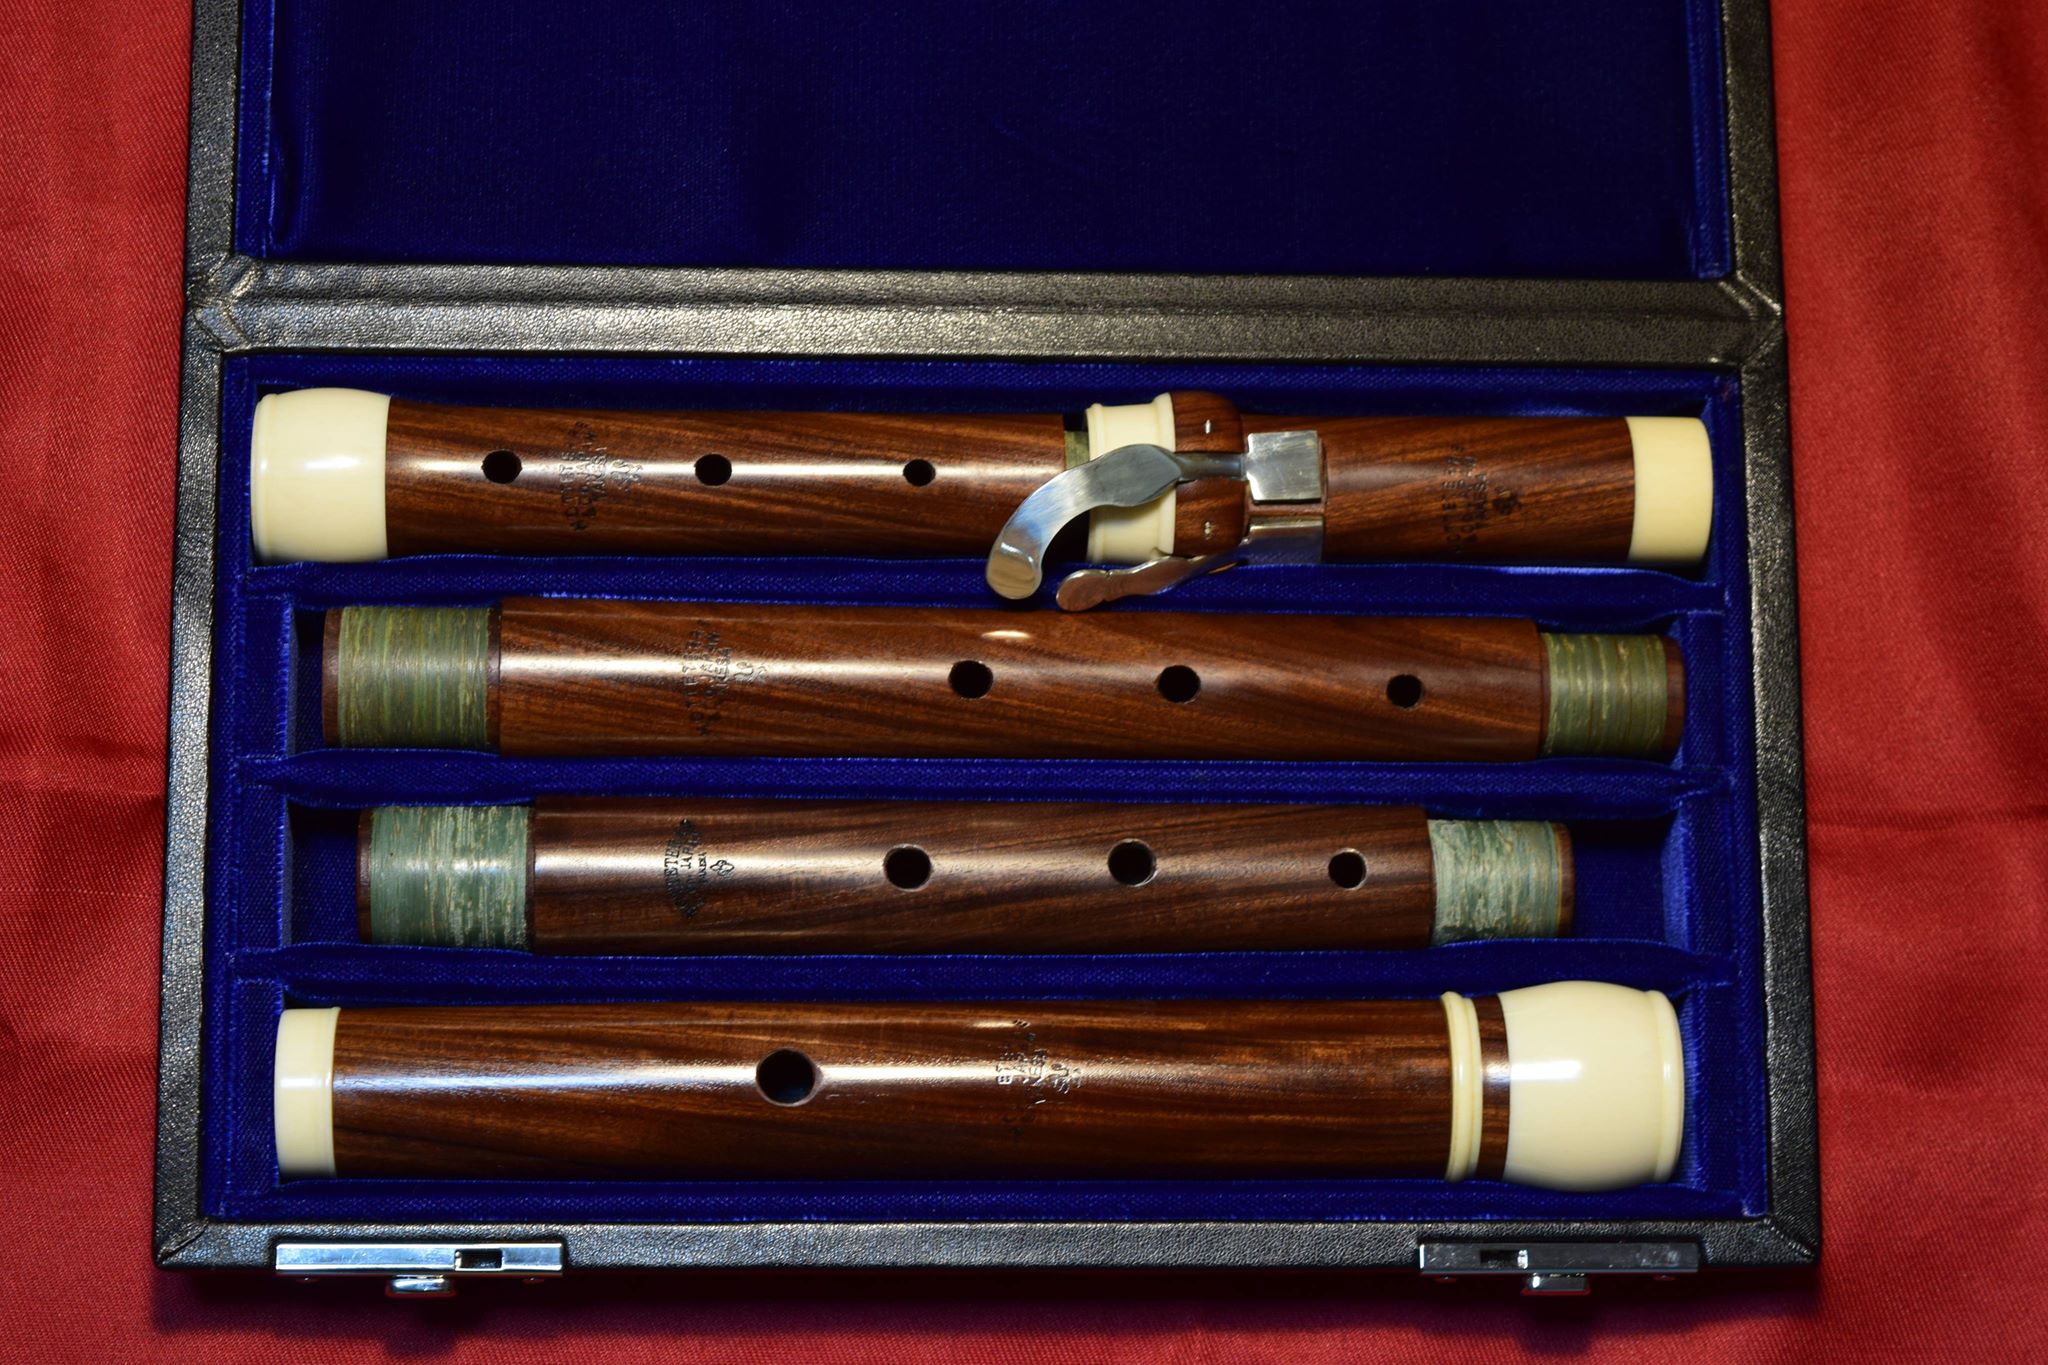  Flute by Keigo Takesa of Hotteterre &amp; Co, Japan after J.J. Quantz. A=415/392. Rosewood with artificial ivory turnings.  